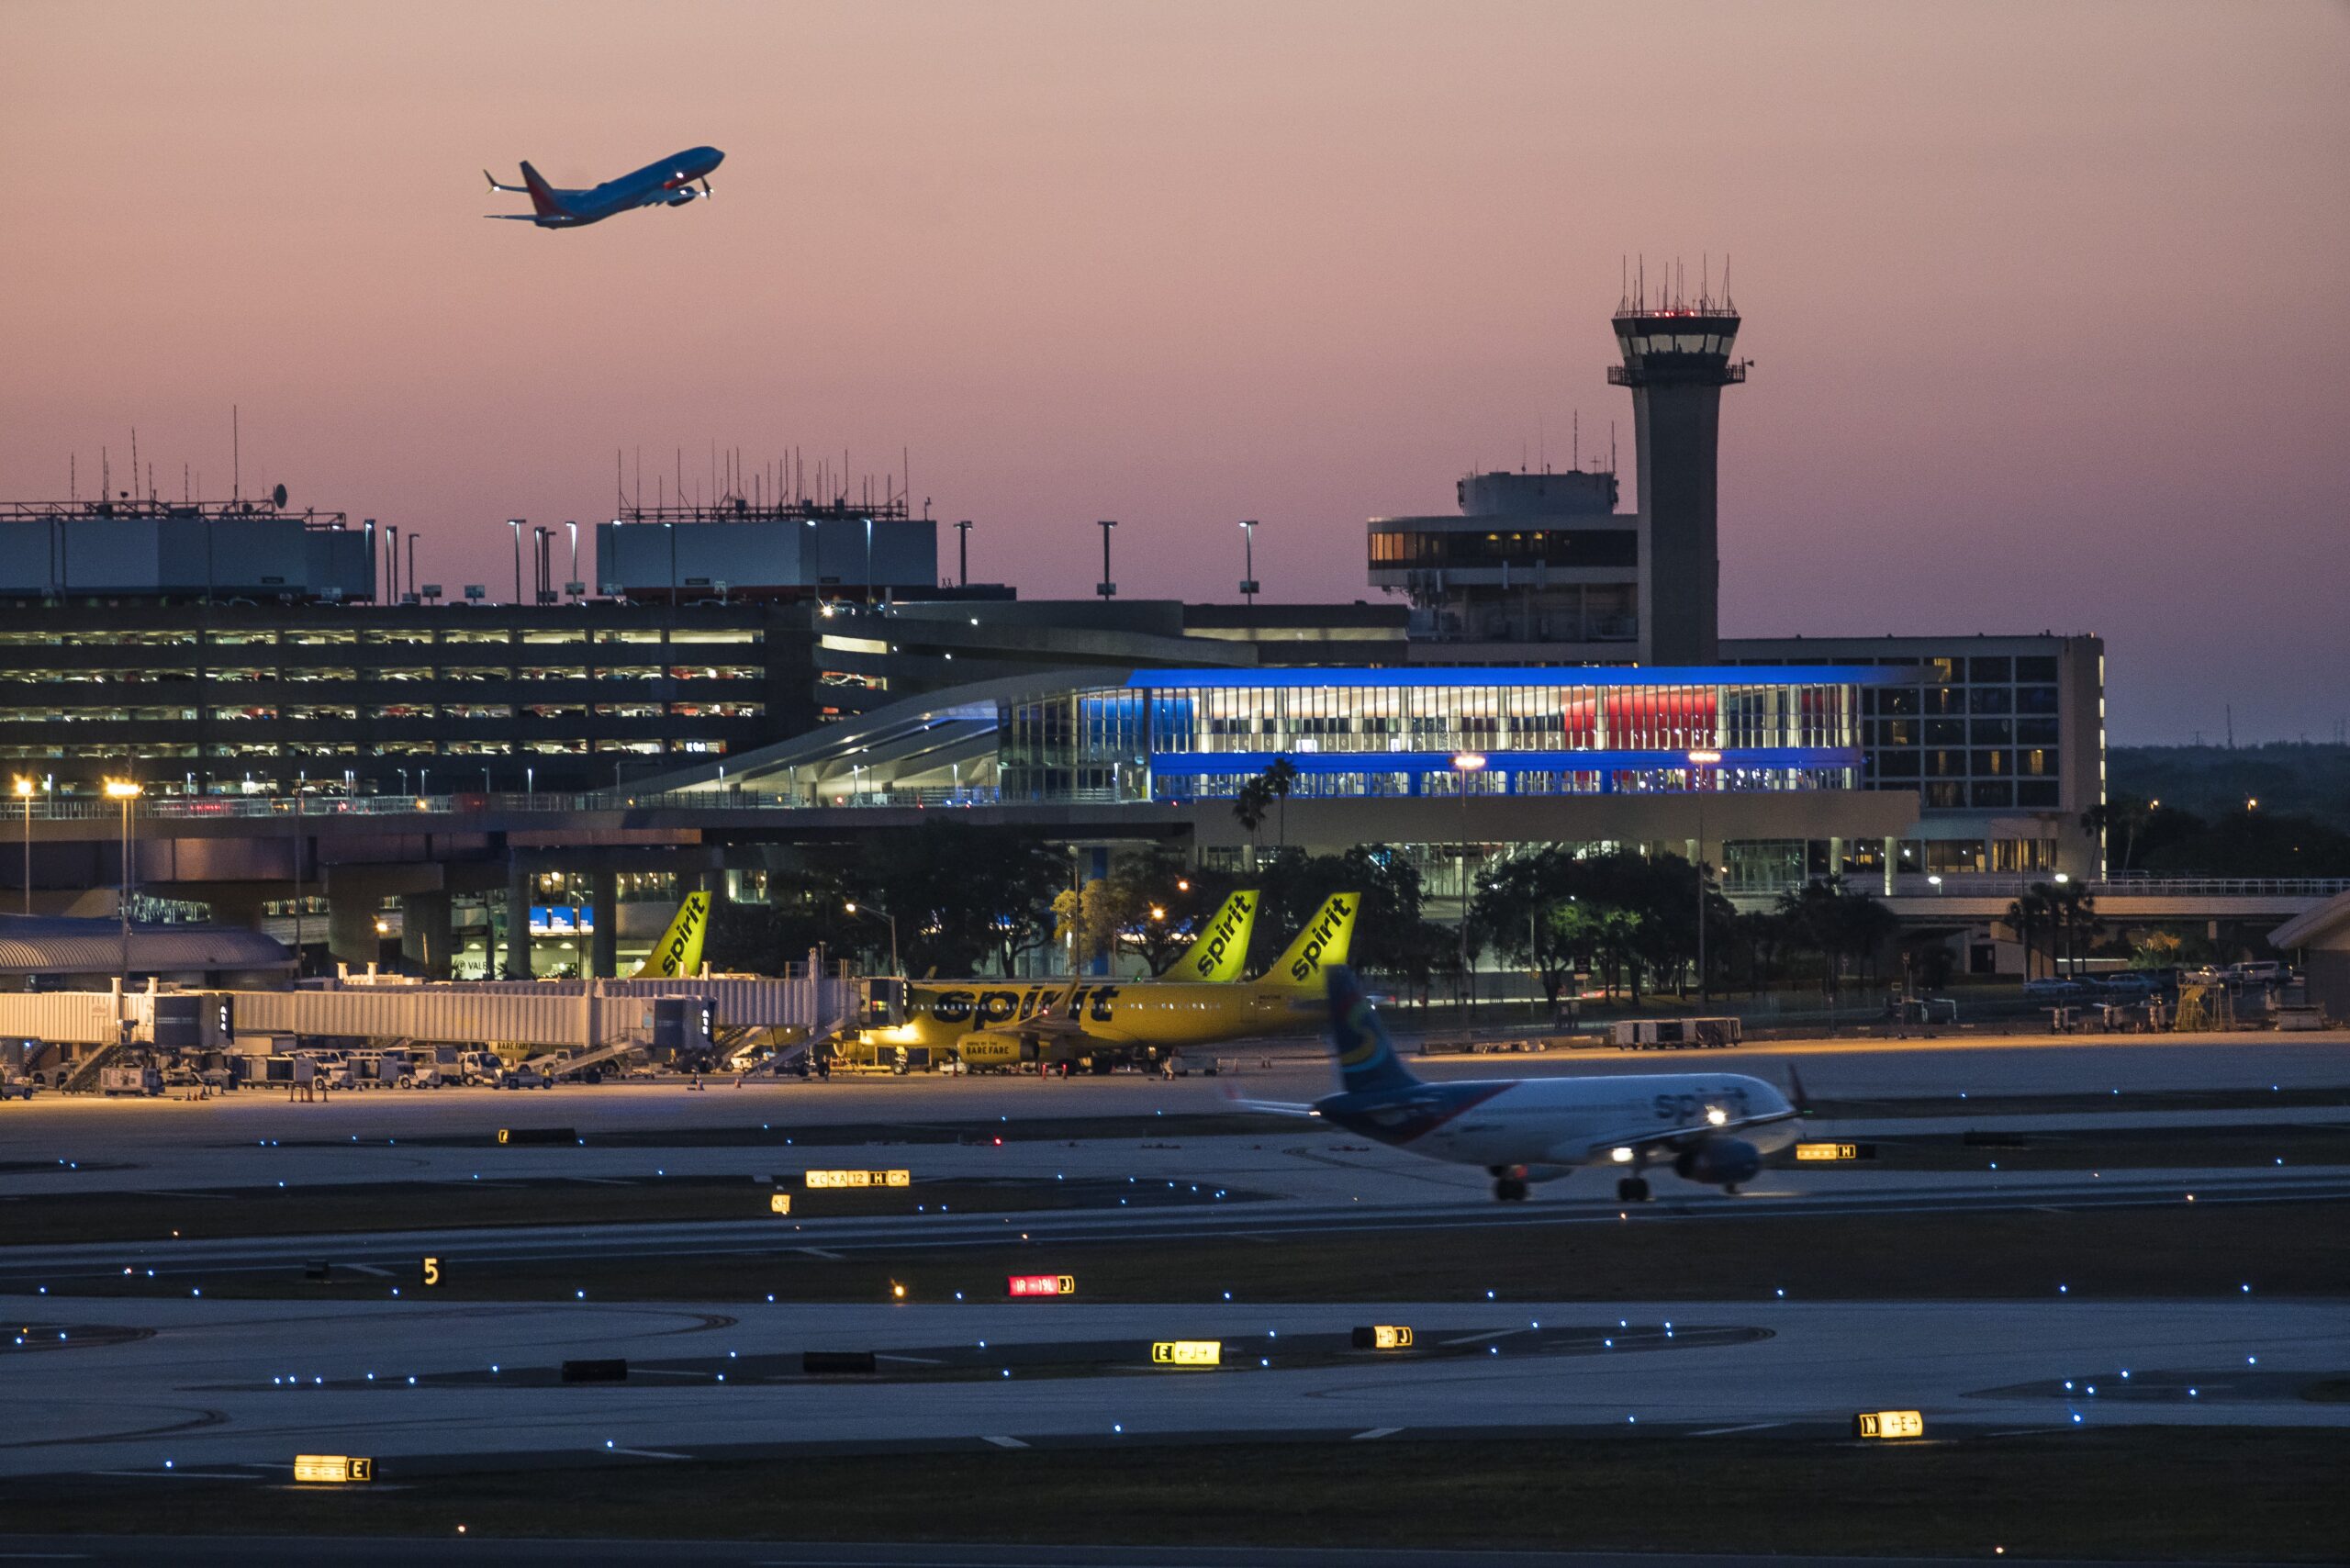 Tampa International Airport is a major economic driver for the Tampa Bay region and is the gateway to the west coast of Florida